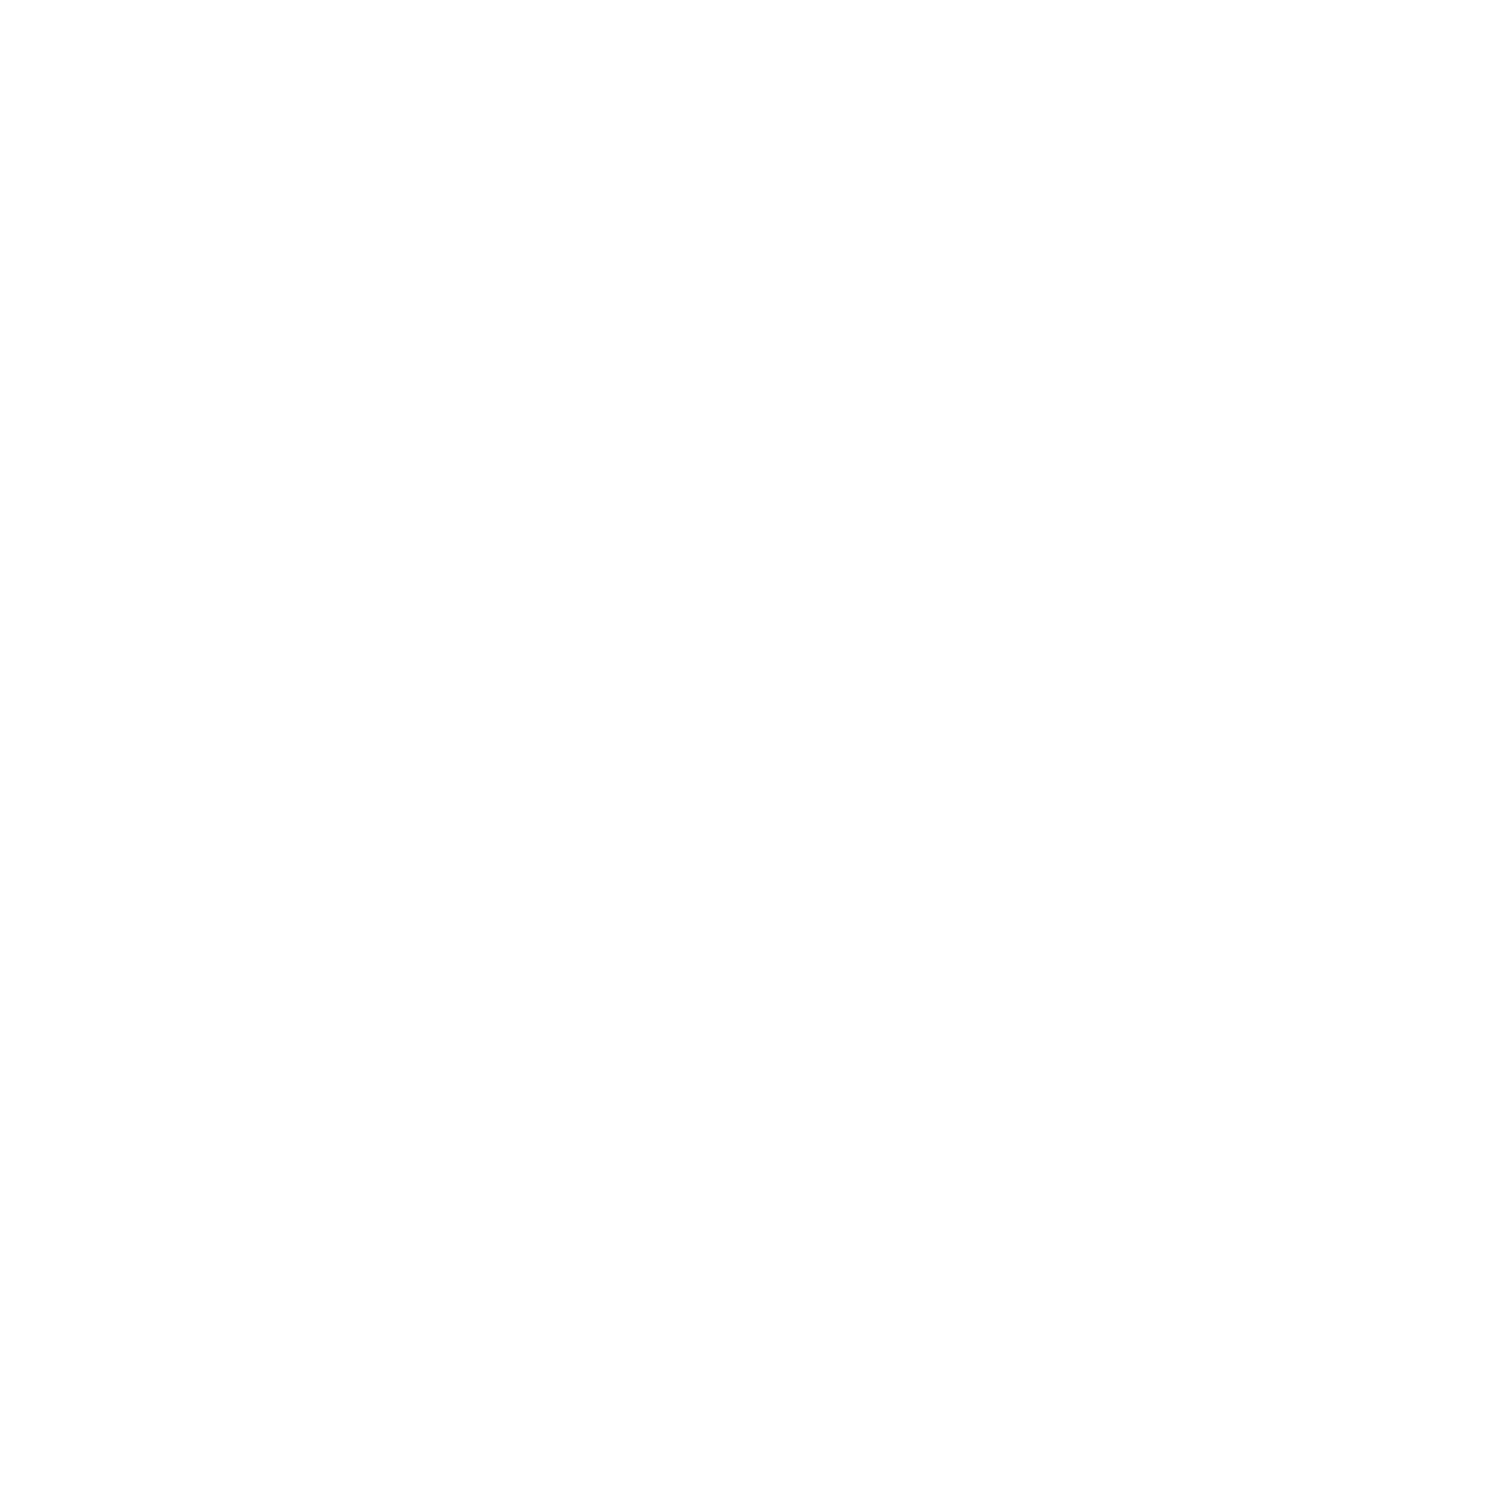 Cahoots Records Official Website